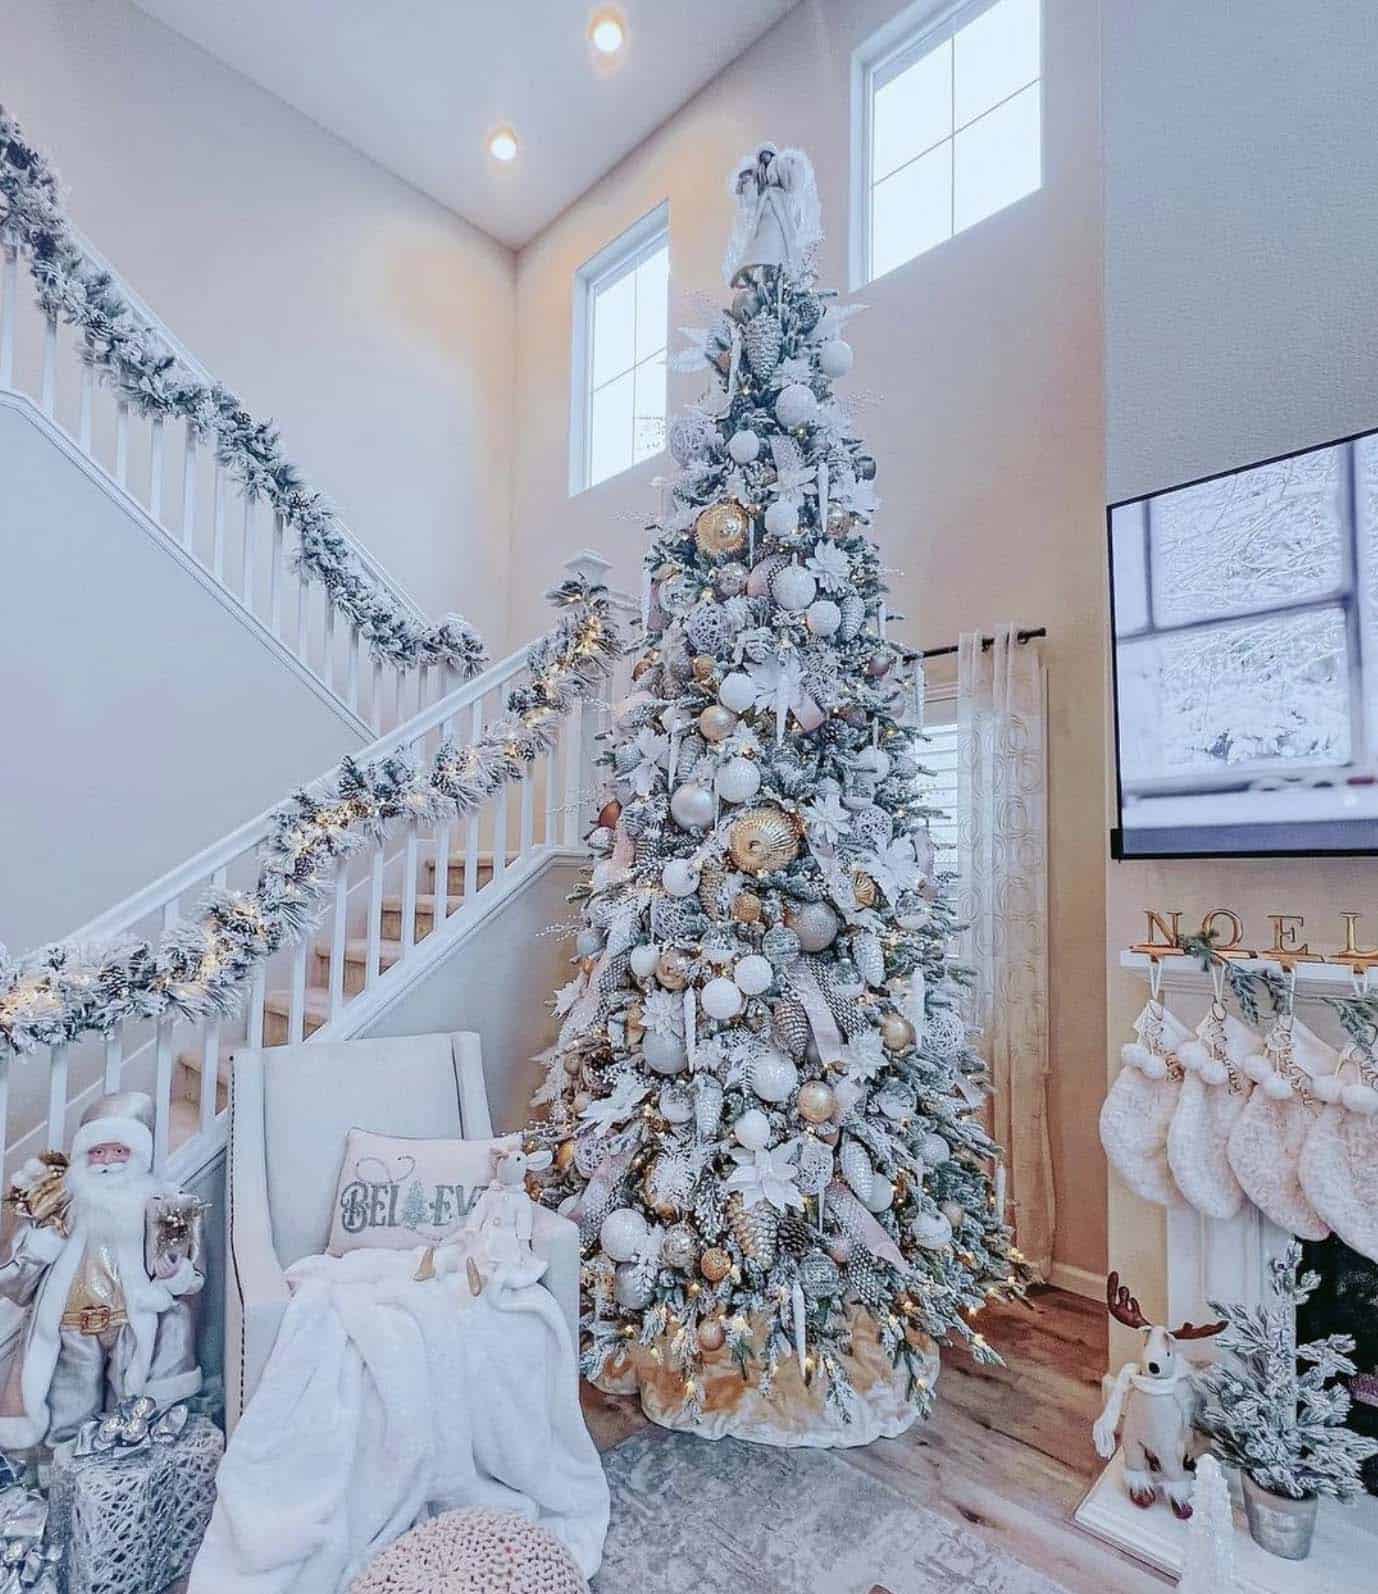 christmas-decorated-living-room-with-a-flocked-tree-and-garland-on-the-staircase